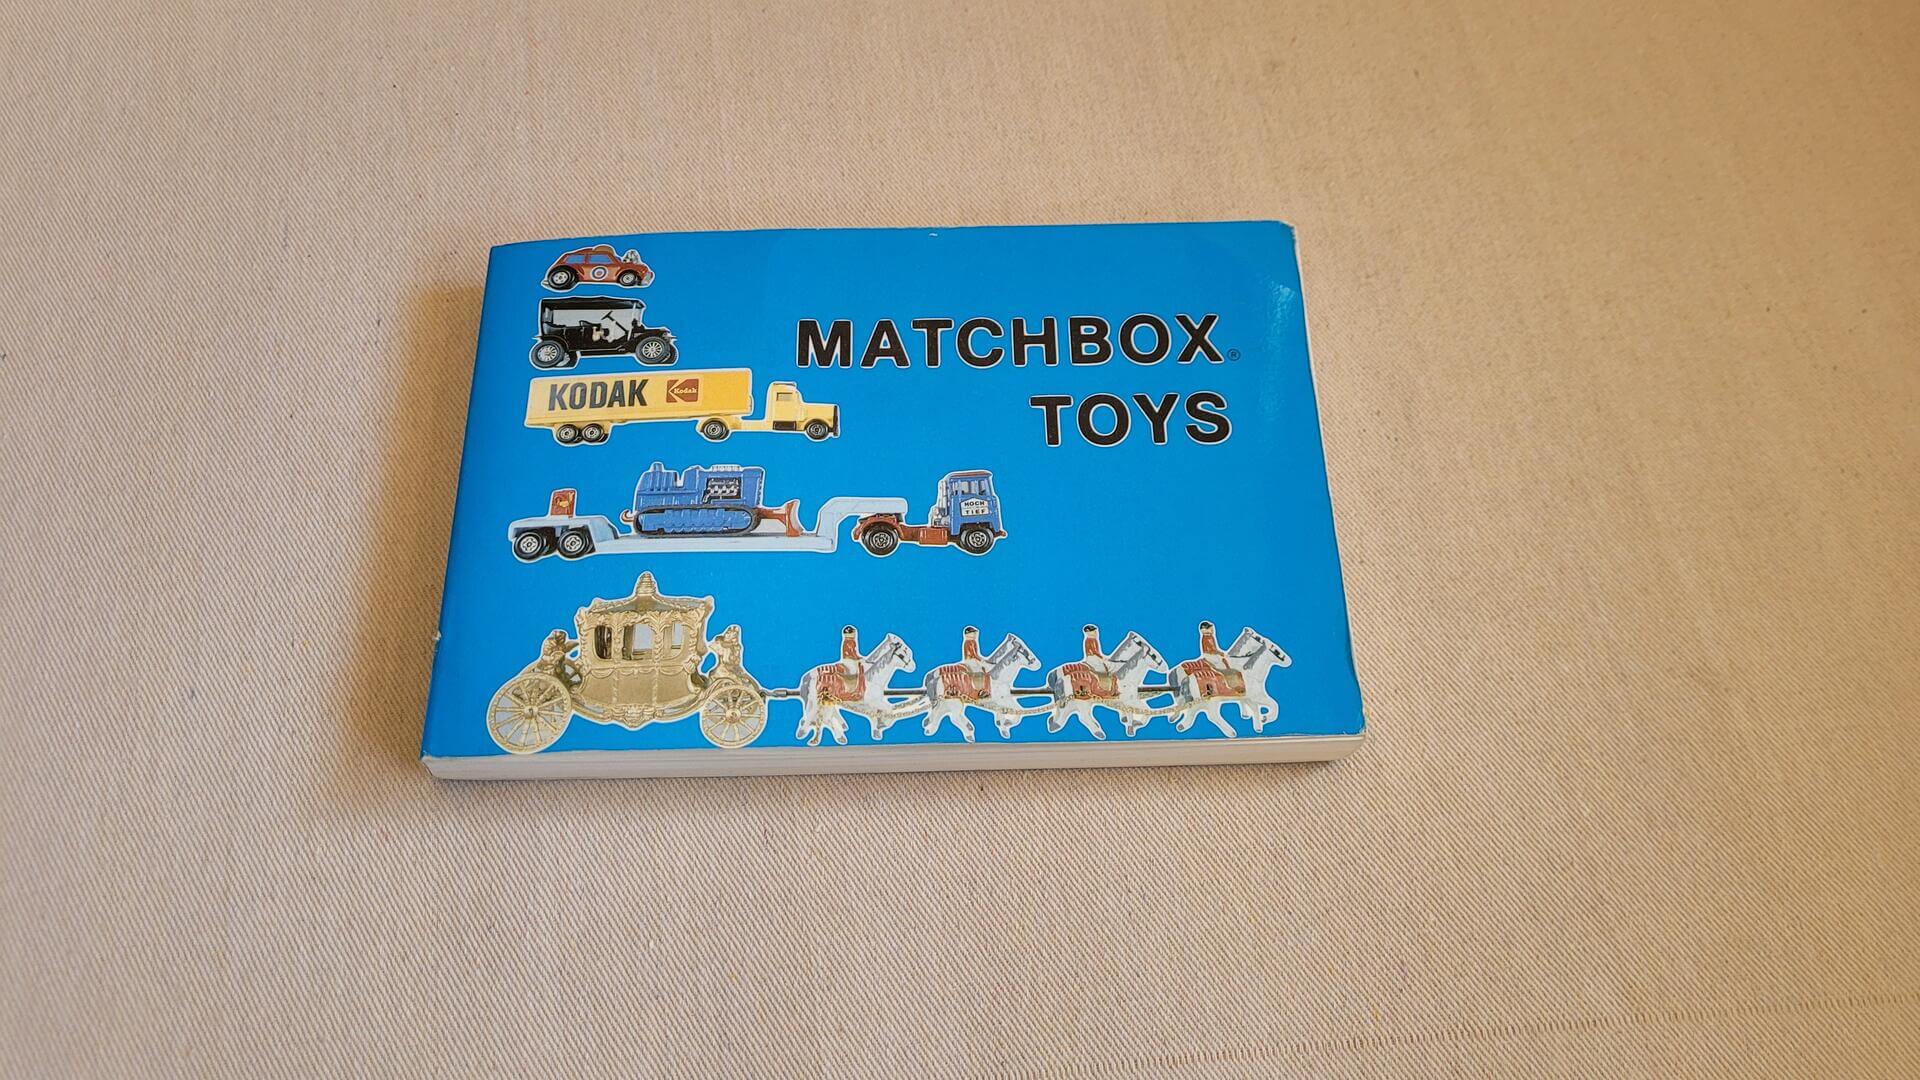 1983 Matchbox Toys price guide book by Nancy Schiffer. Vintage collector reference and guide book on diecast metal toy car models